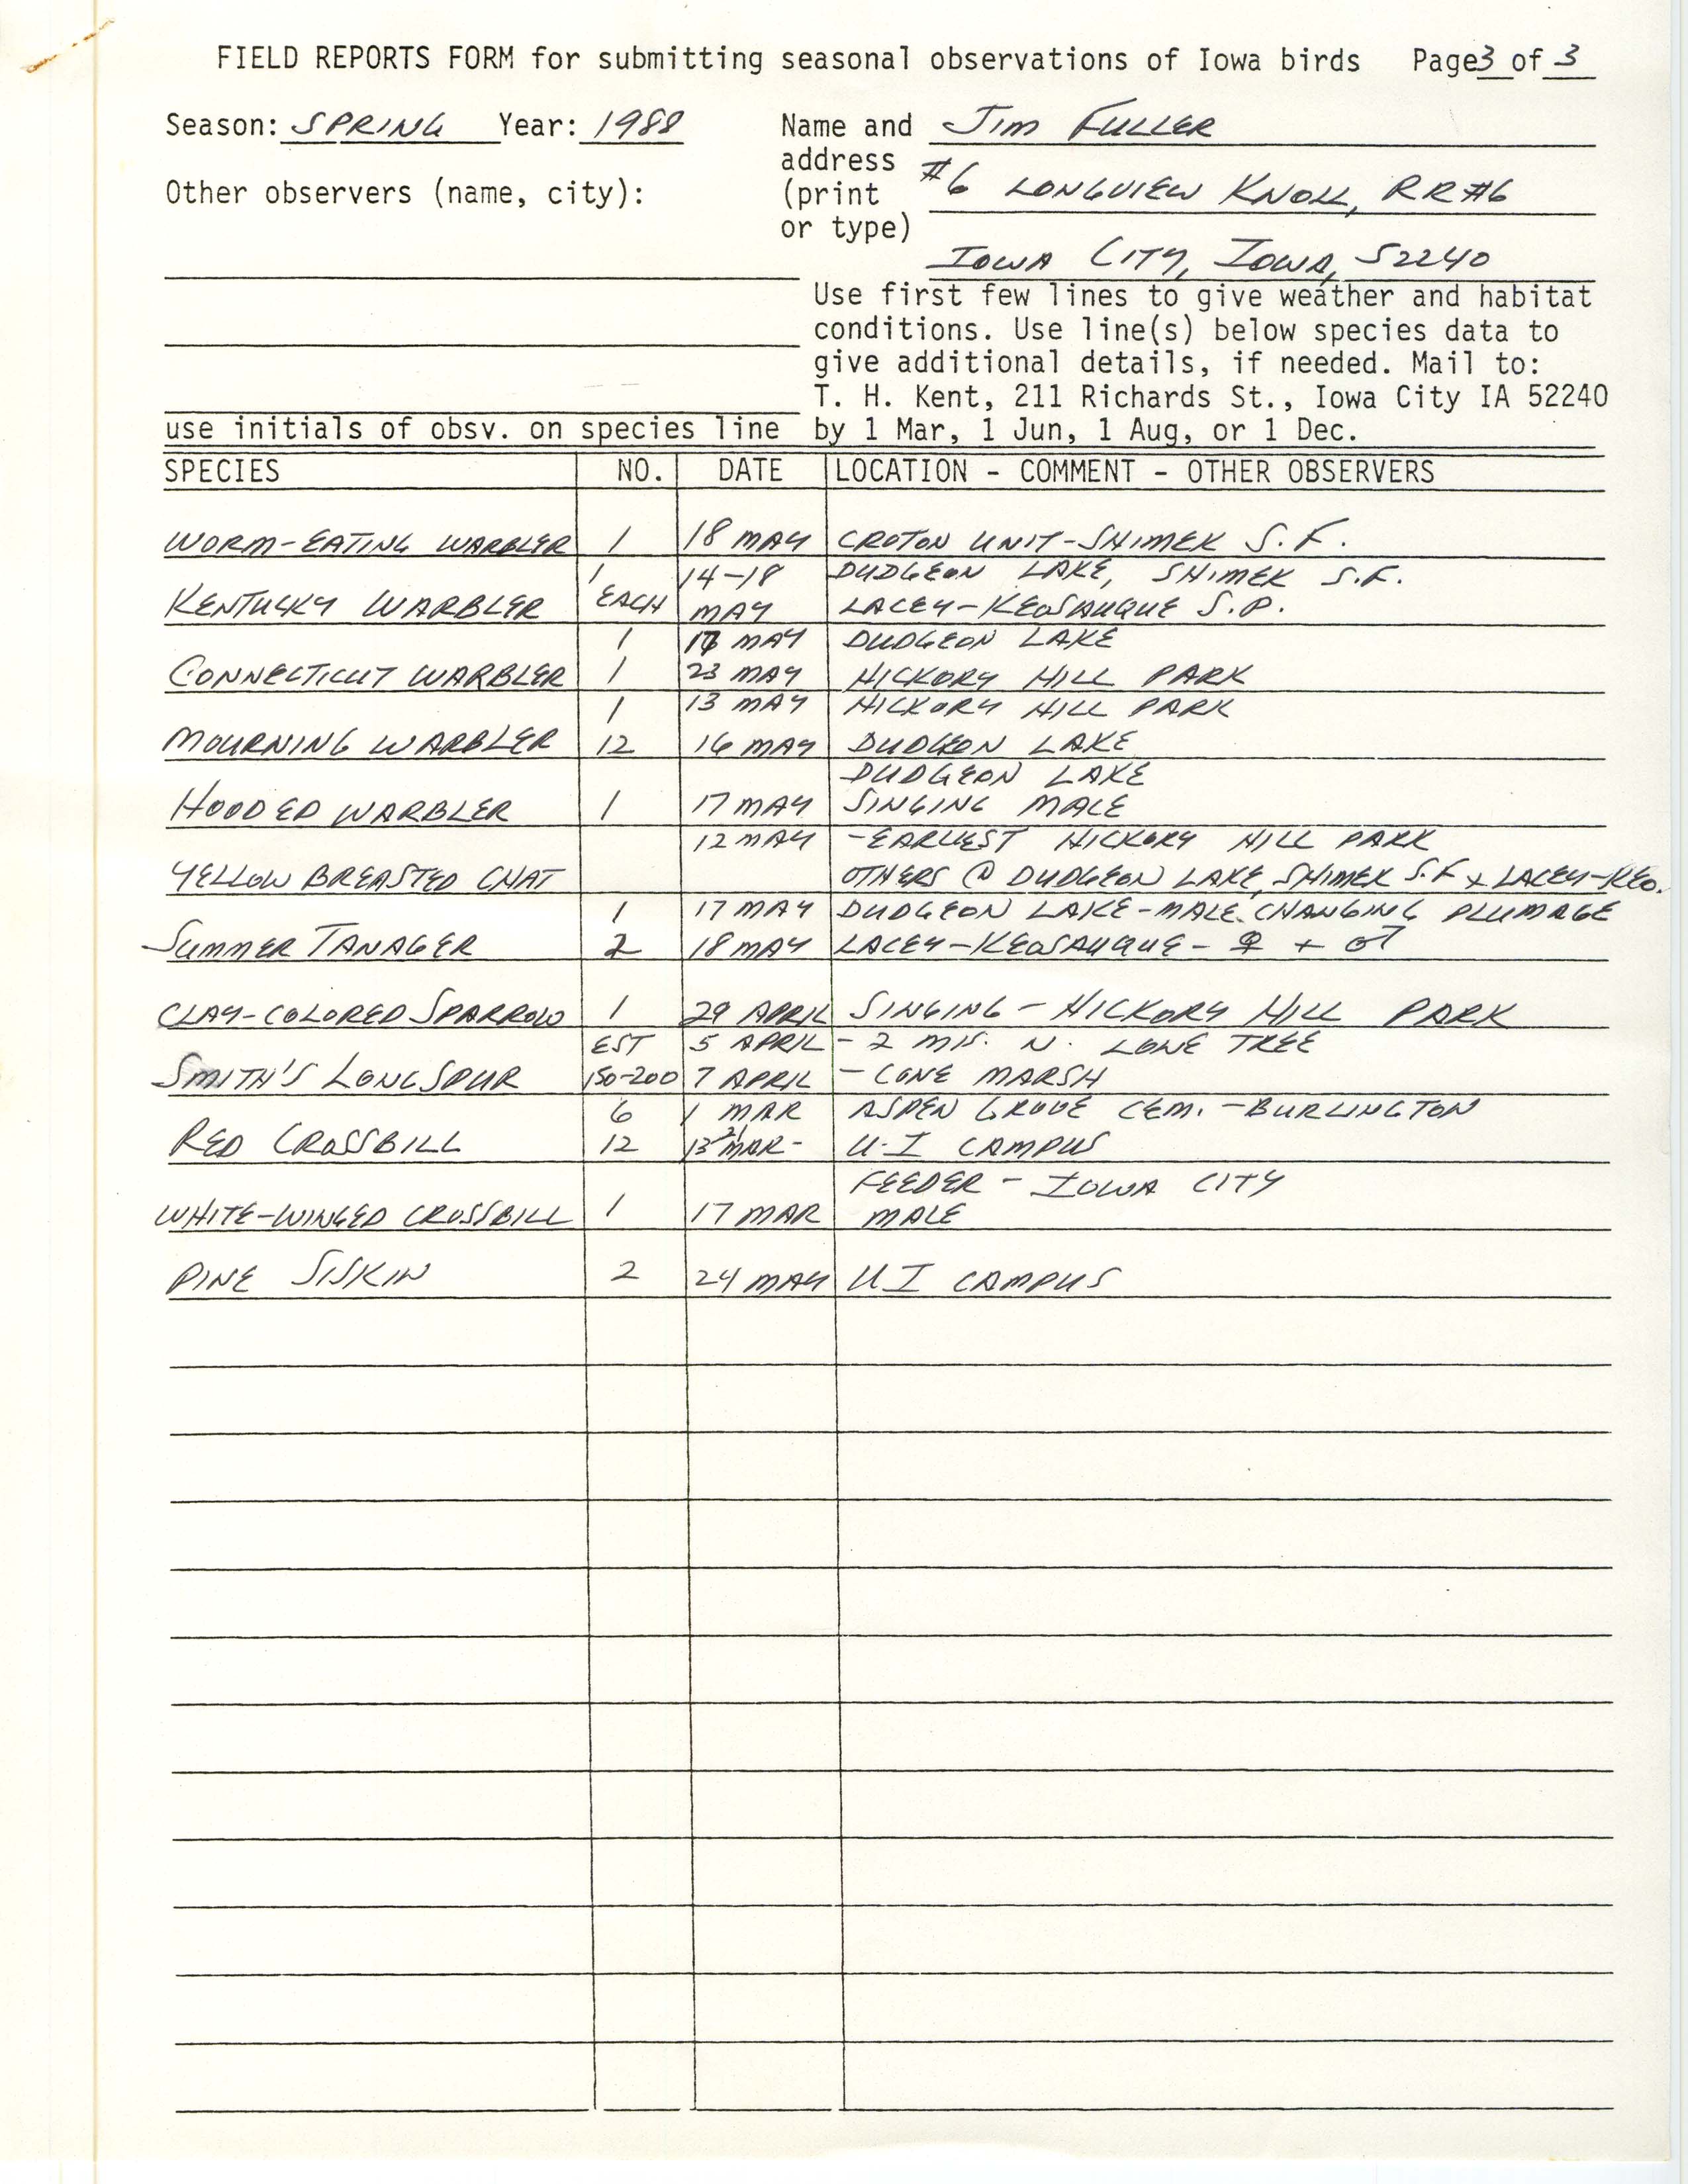 Field reports form for submitting seasonal observations of Iowa birds, James L. Fuller, spring 1988